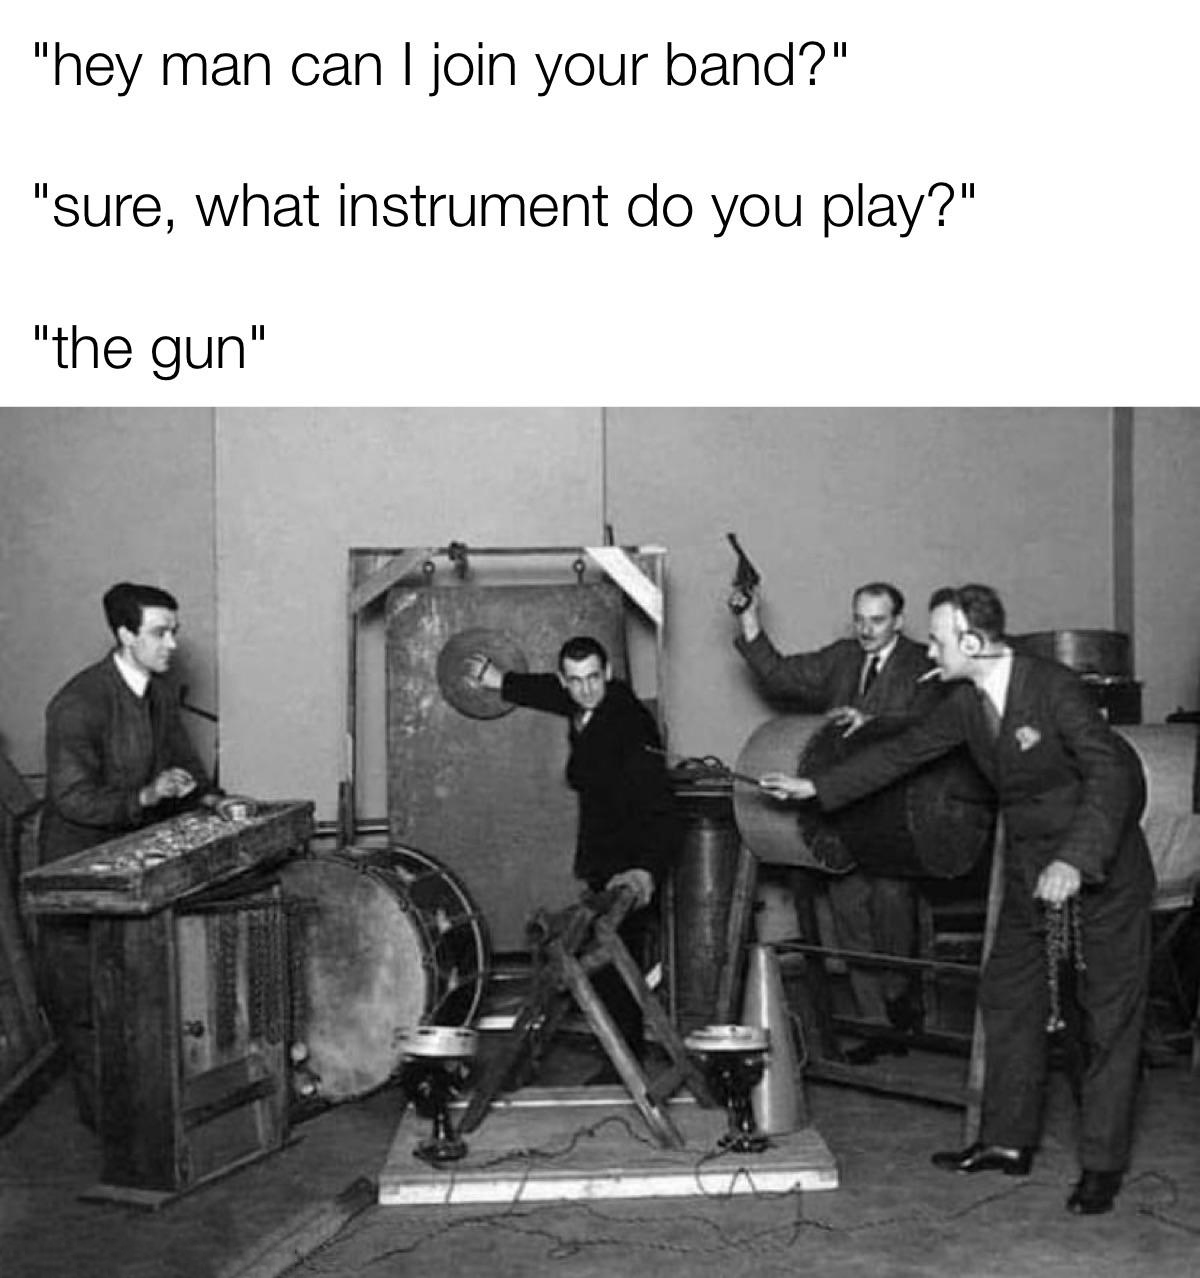 funny memes - dank memes - bbc sound effects department 1927 - "hey man can I join your band?" "sure, what instrument do you play?" "the gun"